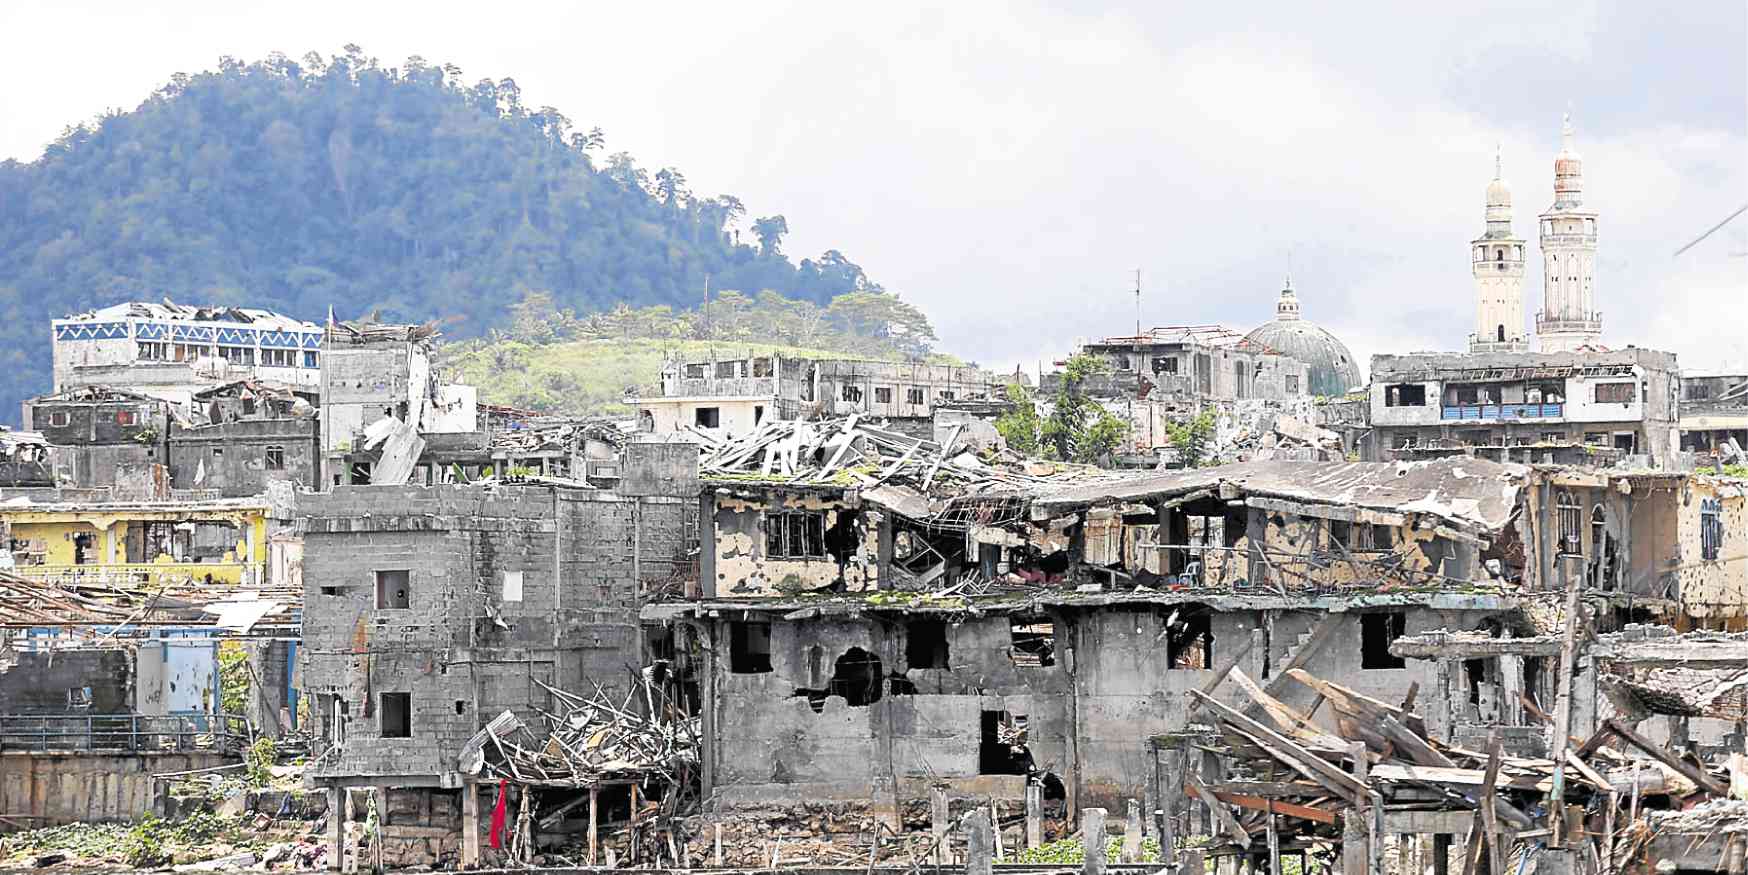 Marawi not a 'ghost city', Washington Post article ‘not true’ – task force head